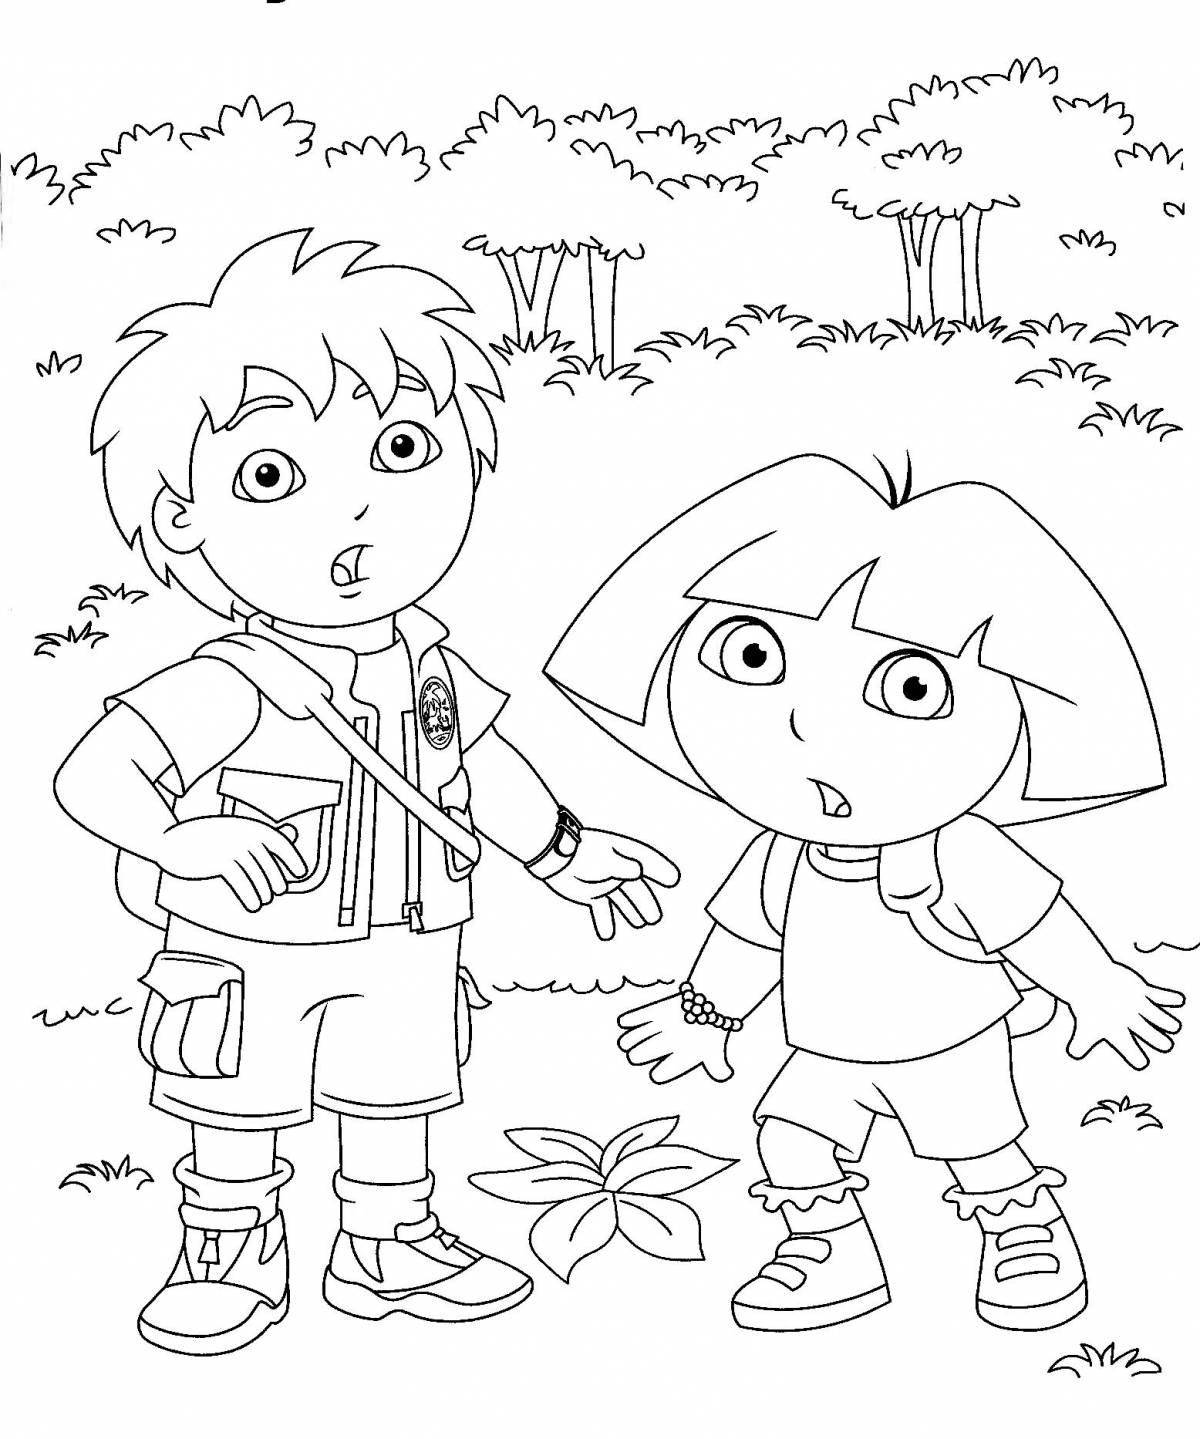 Charming diego go coloring book